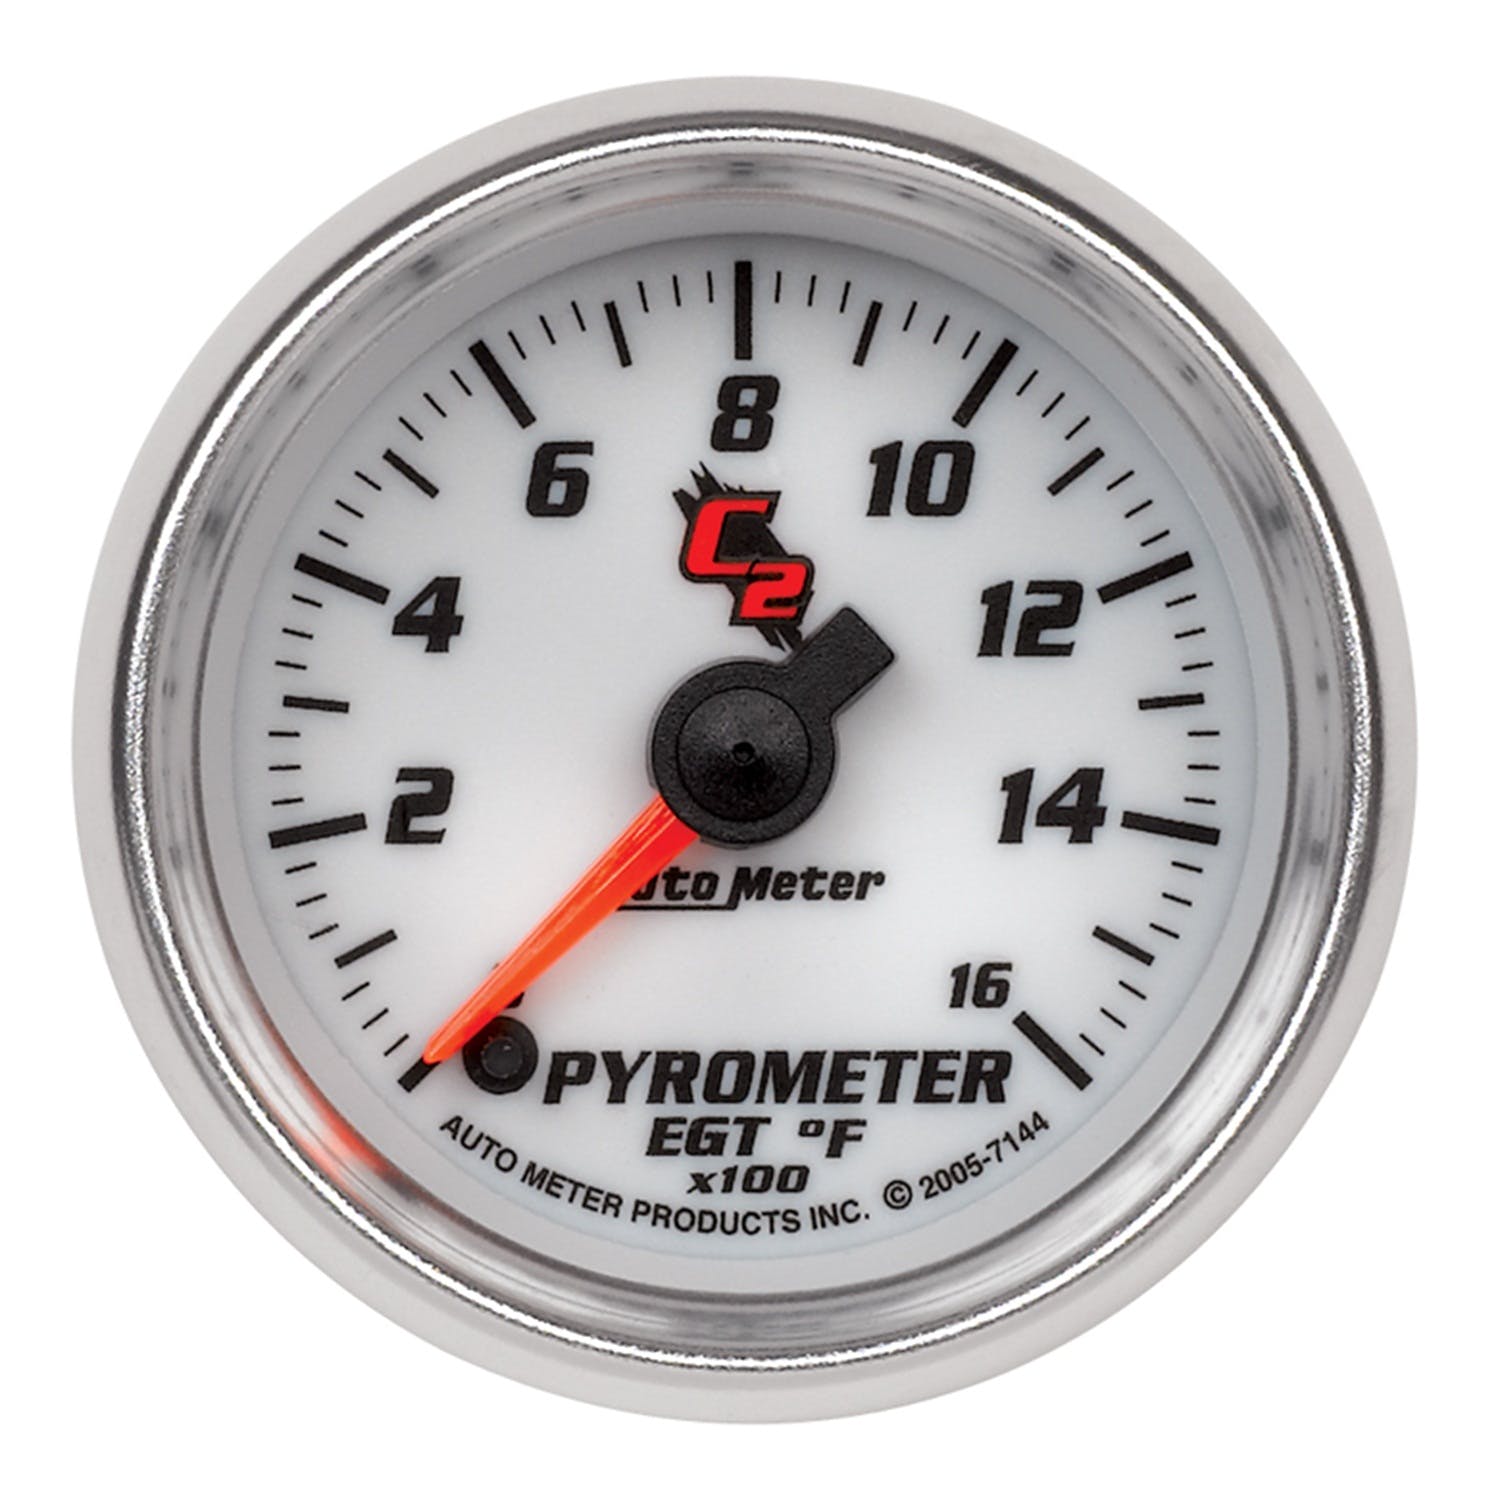 AutoMeter Products 7144 Pyrometer 0-1600 F